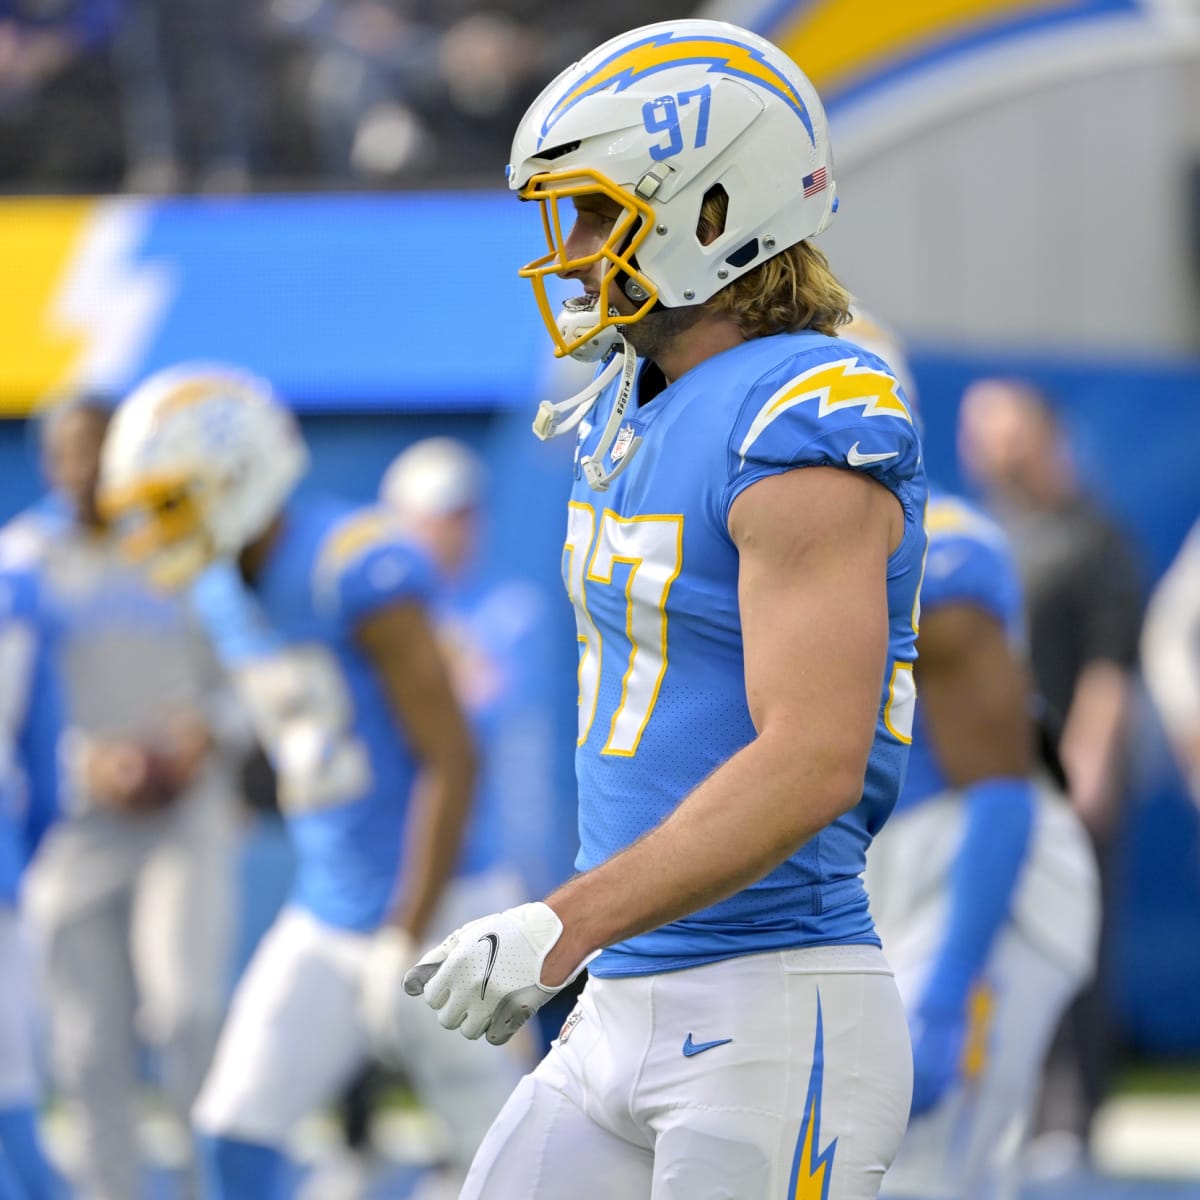 Joey Bosa put on weight, hopes to be better against the run - NBC Sports